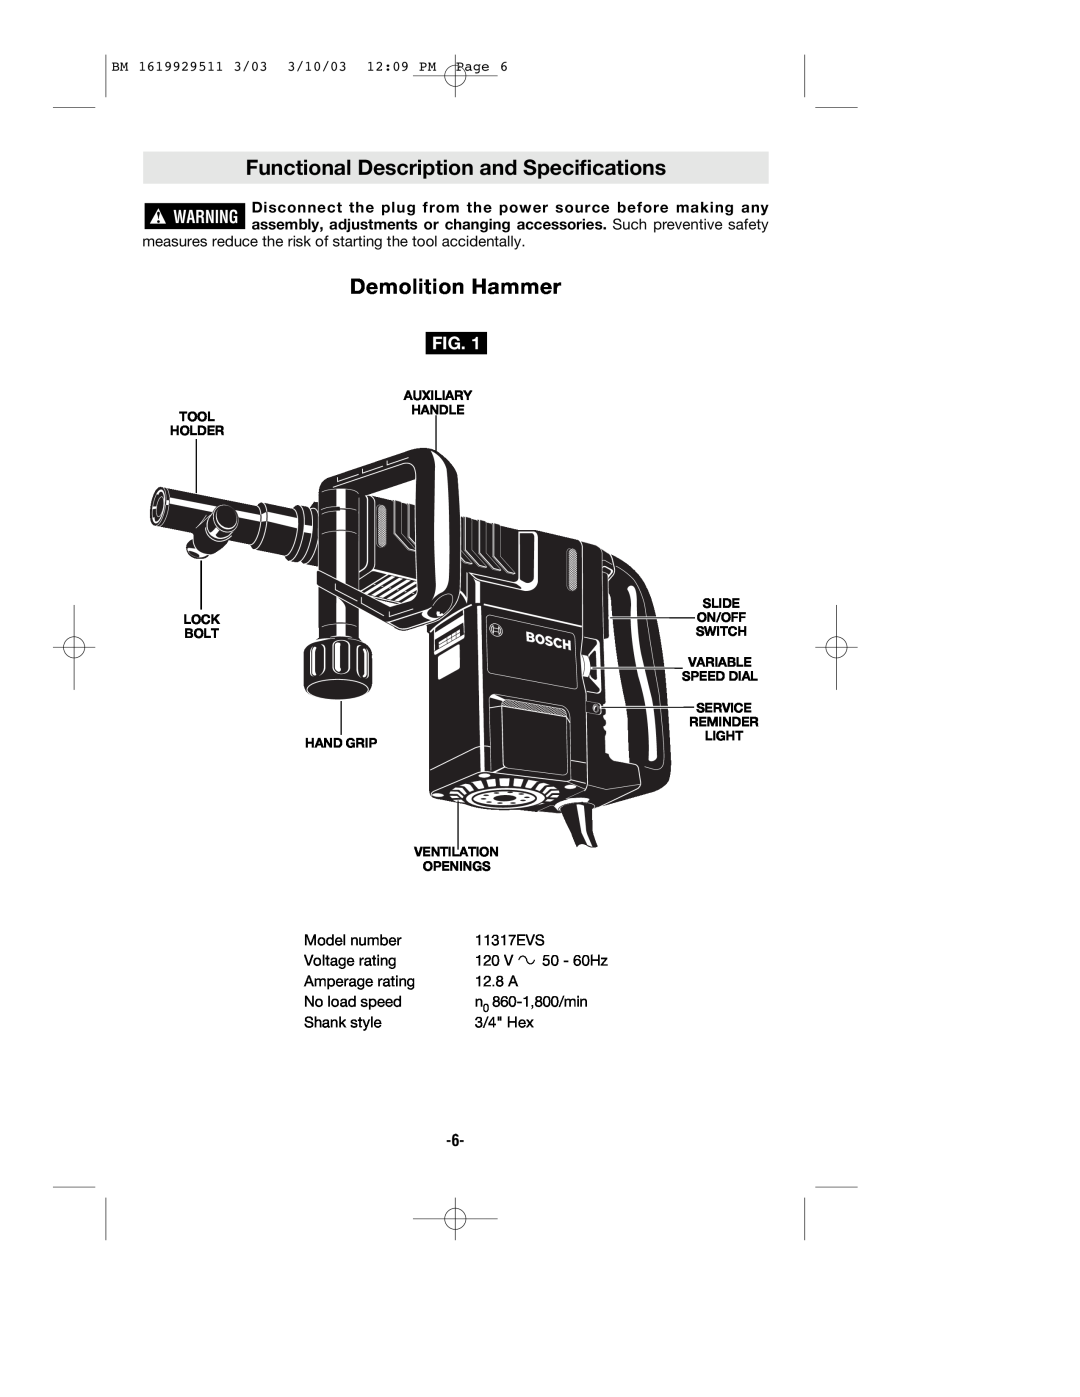 Bosch Power Tools 11317EVS manual Functional Description and Specifications, Demolition Hammer 